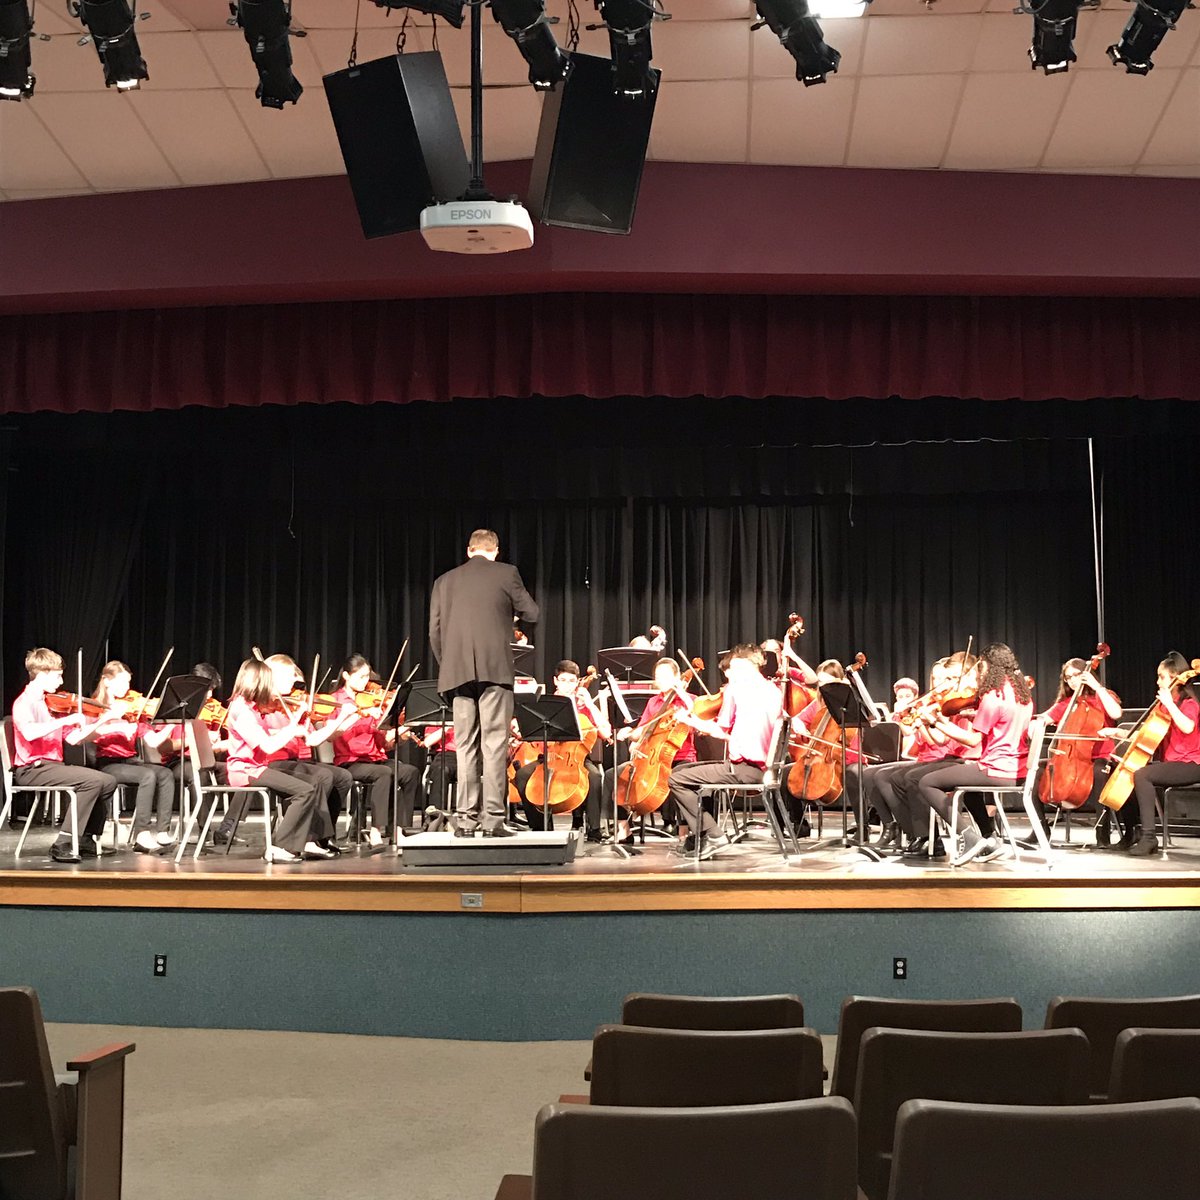 RVMS 8th grade orchestra playing a beautiful piece of music. #RVMSRocks